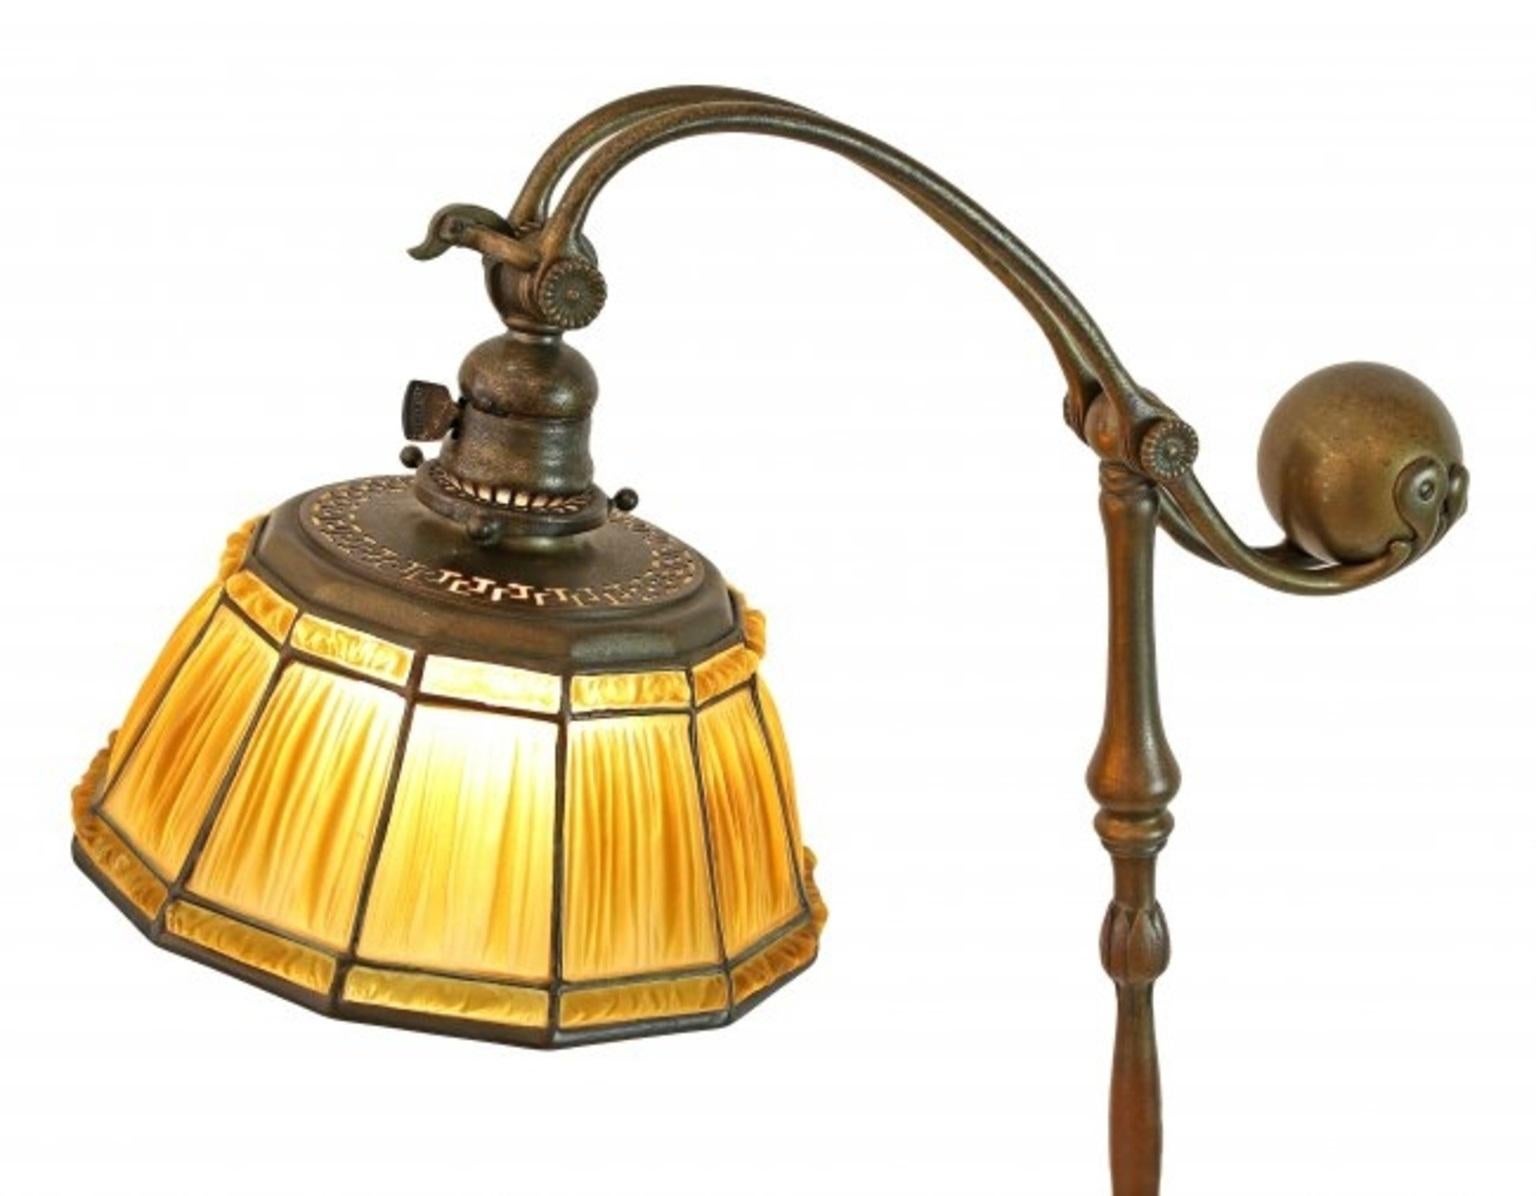 A Tiffany favrile glass and bronze 'Linenfold' counter balance floor lamp,
1899-1920.
Timeless, moderately rare and very desirable, the vivid amber 'linenfold' shade impressed with Tiffany Studios 1936,
the base impressed TIFFANY/STUDIOS/NEW YORK